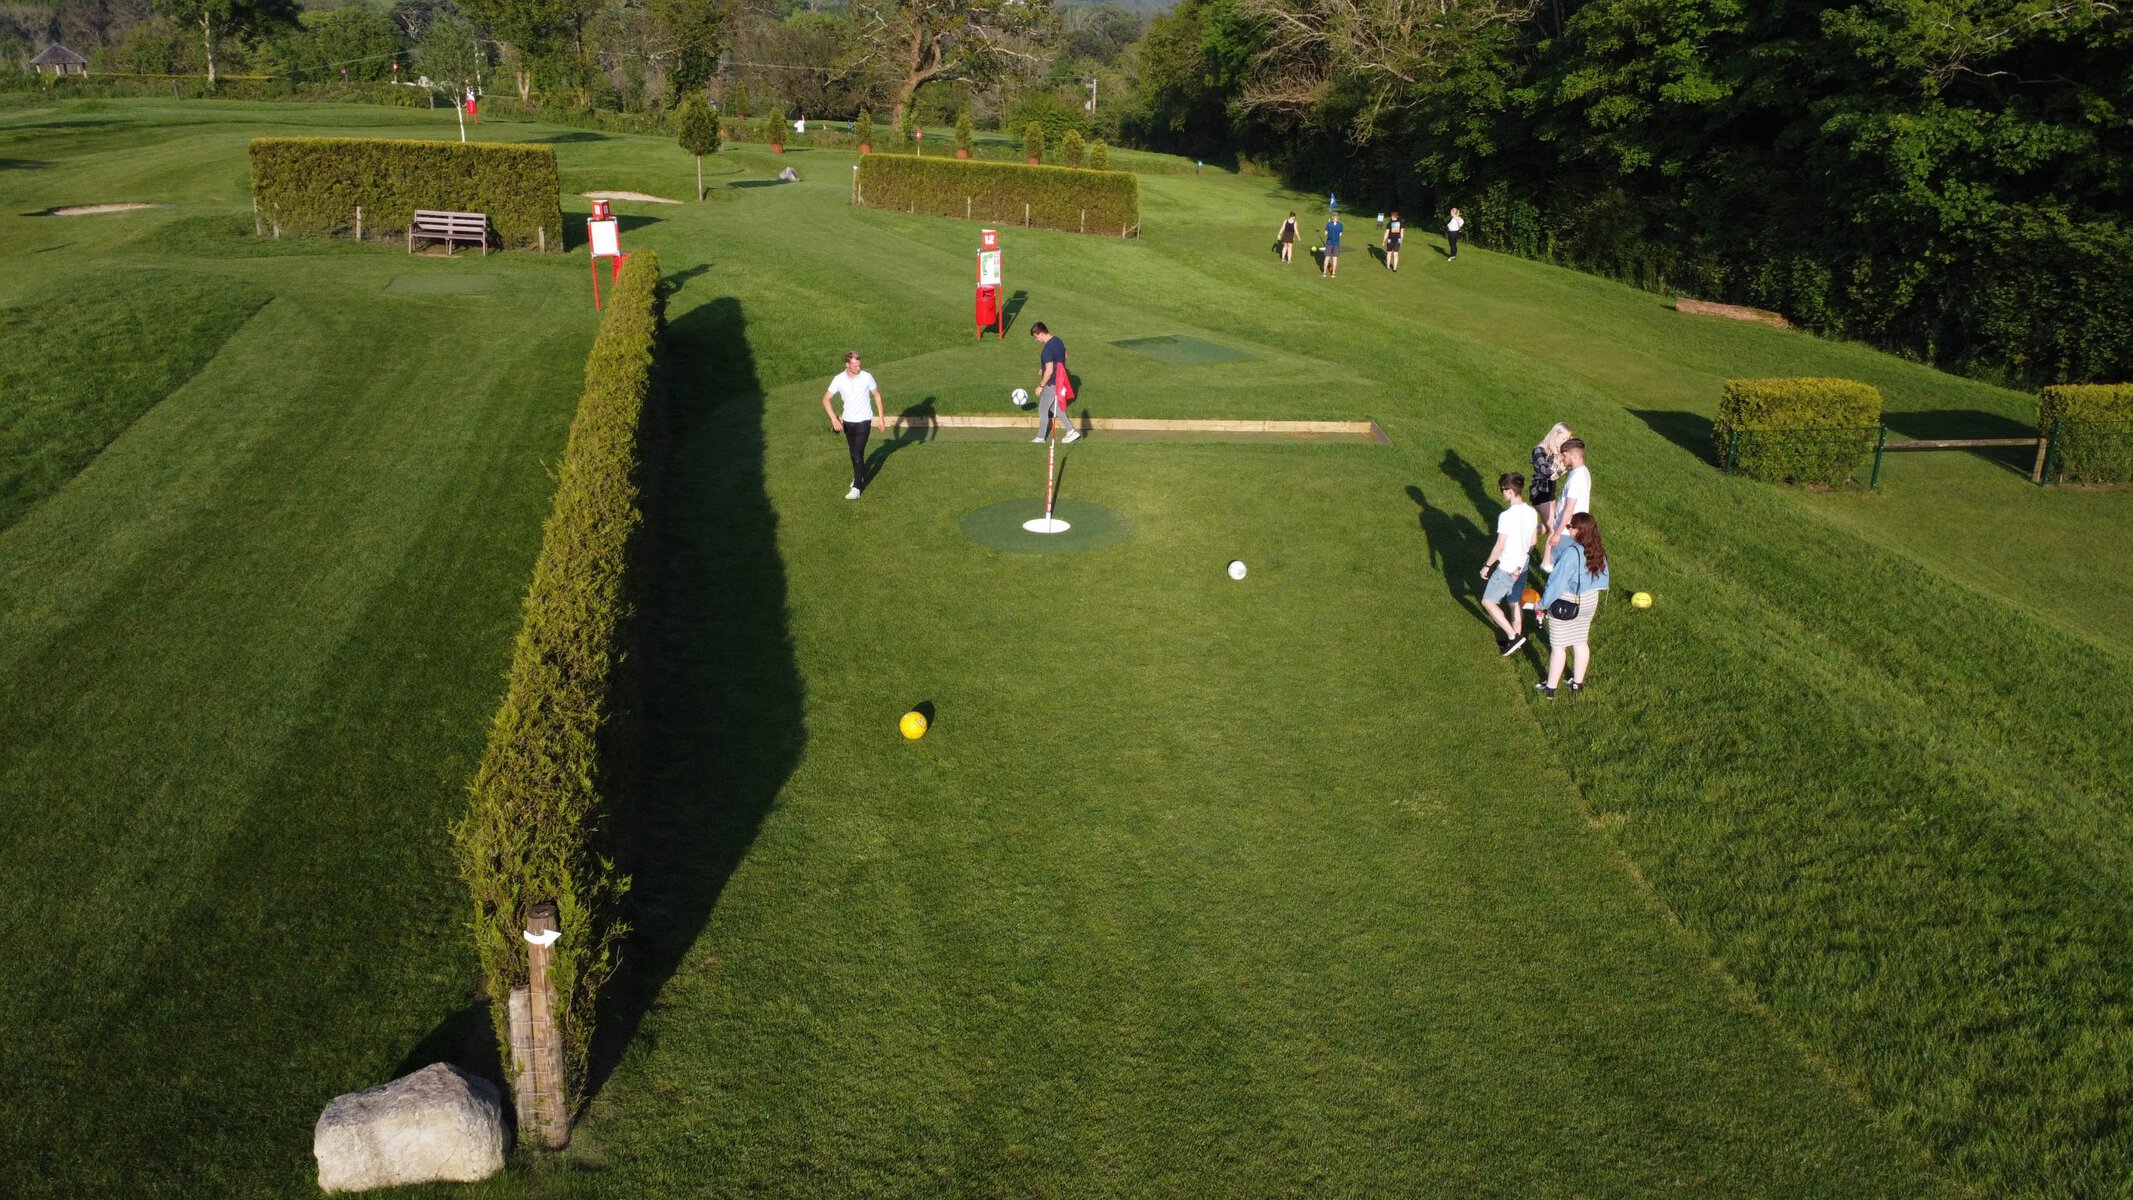 Playing FootballGolf in Cornwall on the Parkland course at Cornwall Football Golf